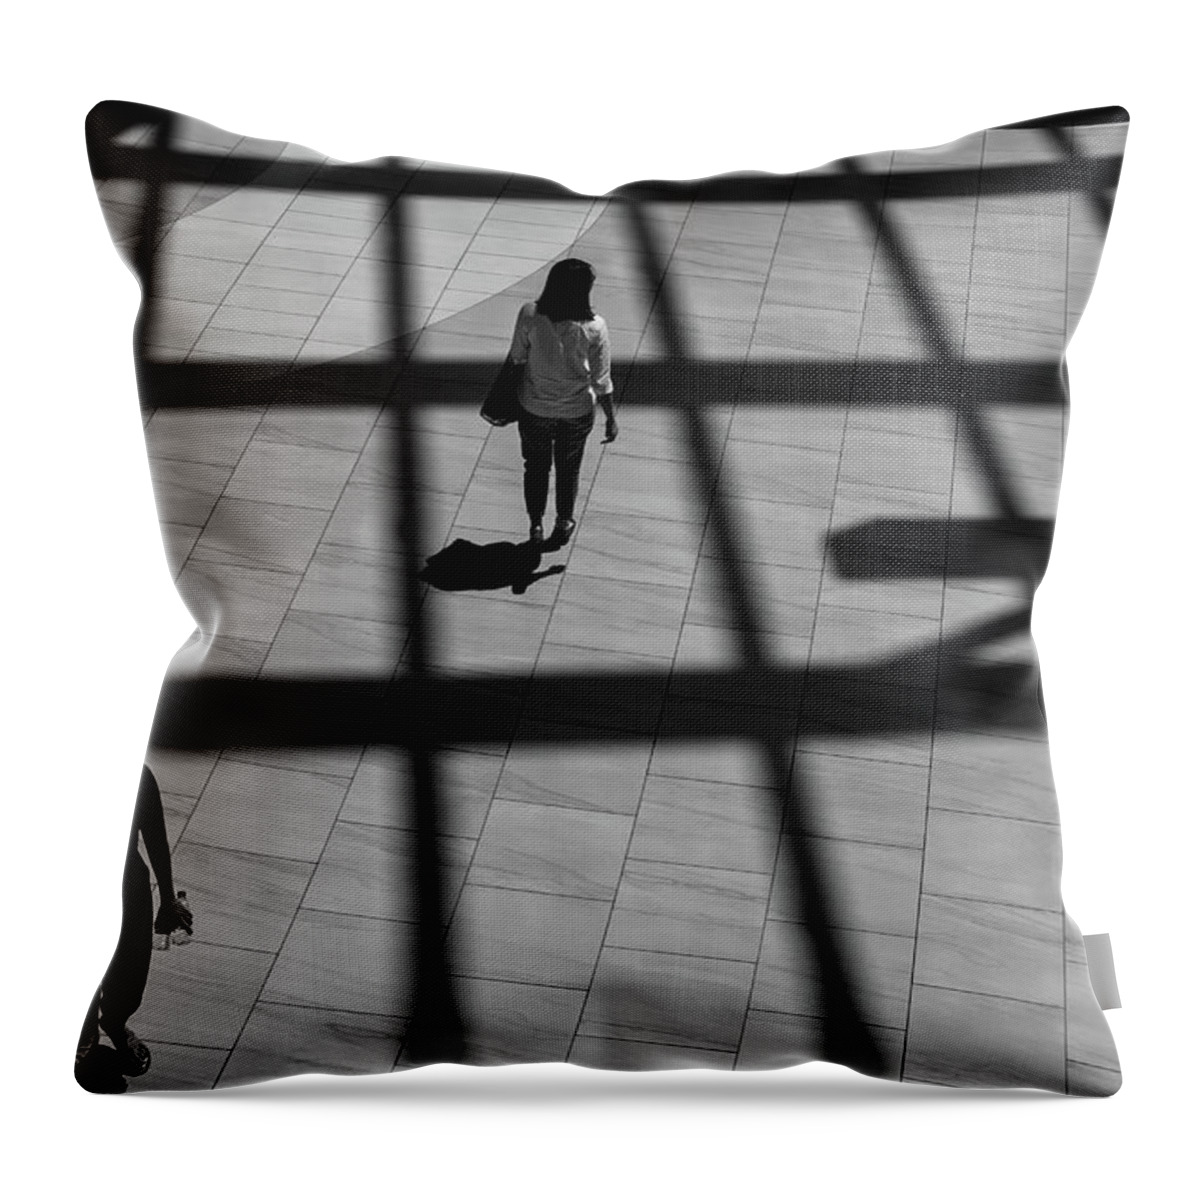 B&w Throw Pillow featuring the photograph On the Grid by Eric Lake